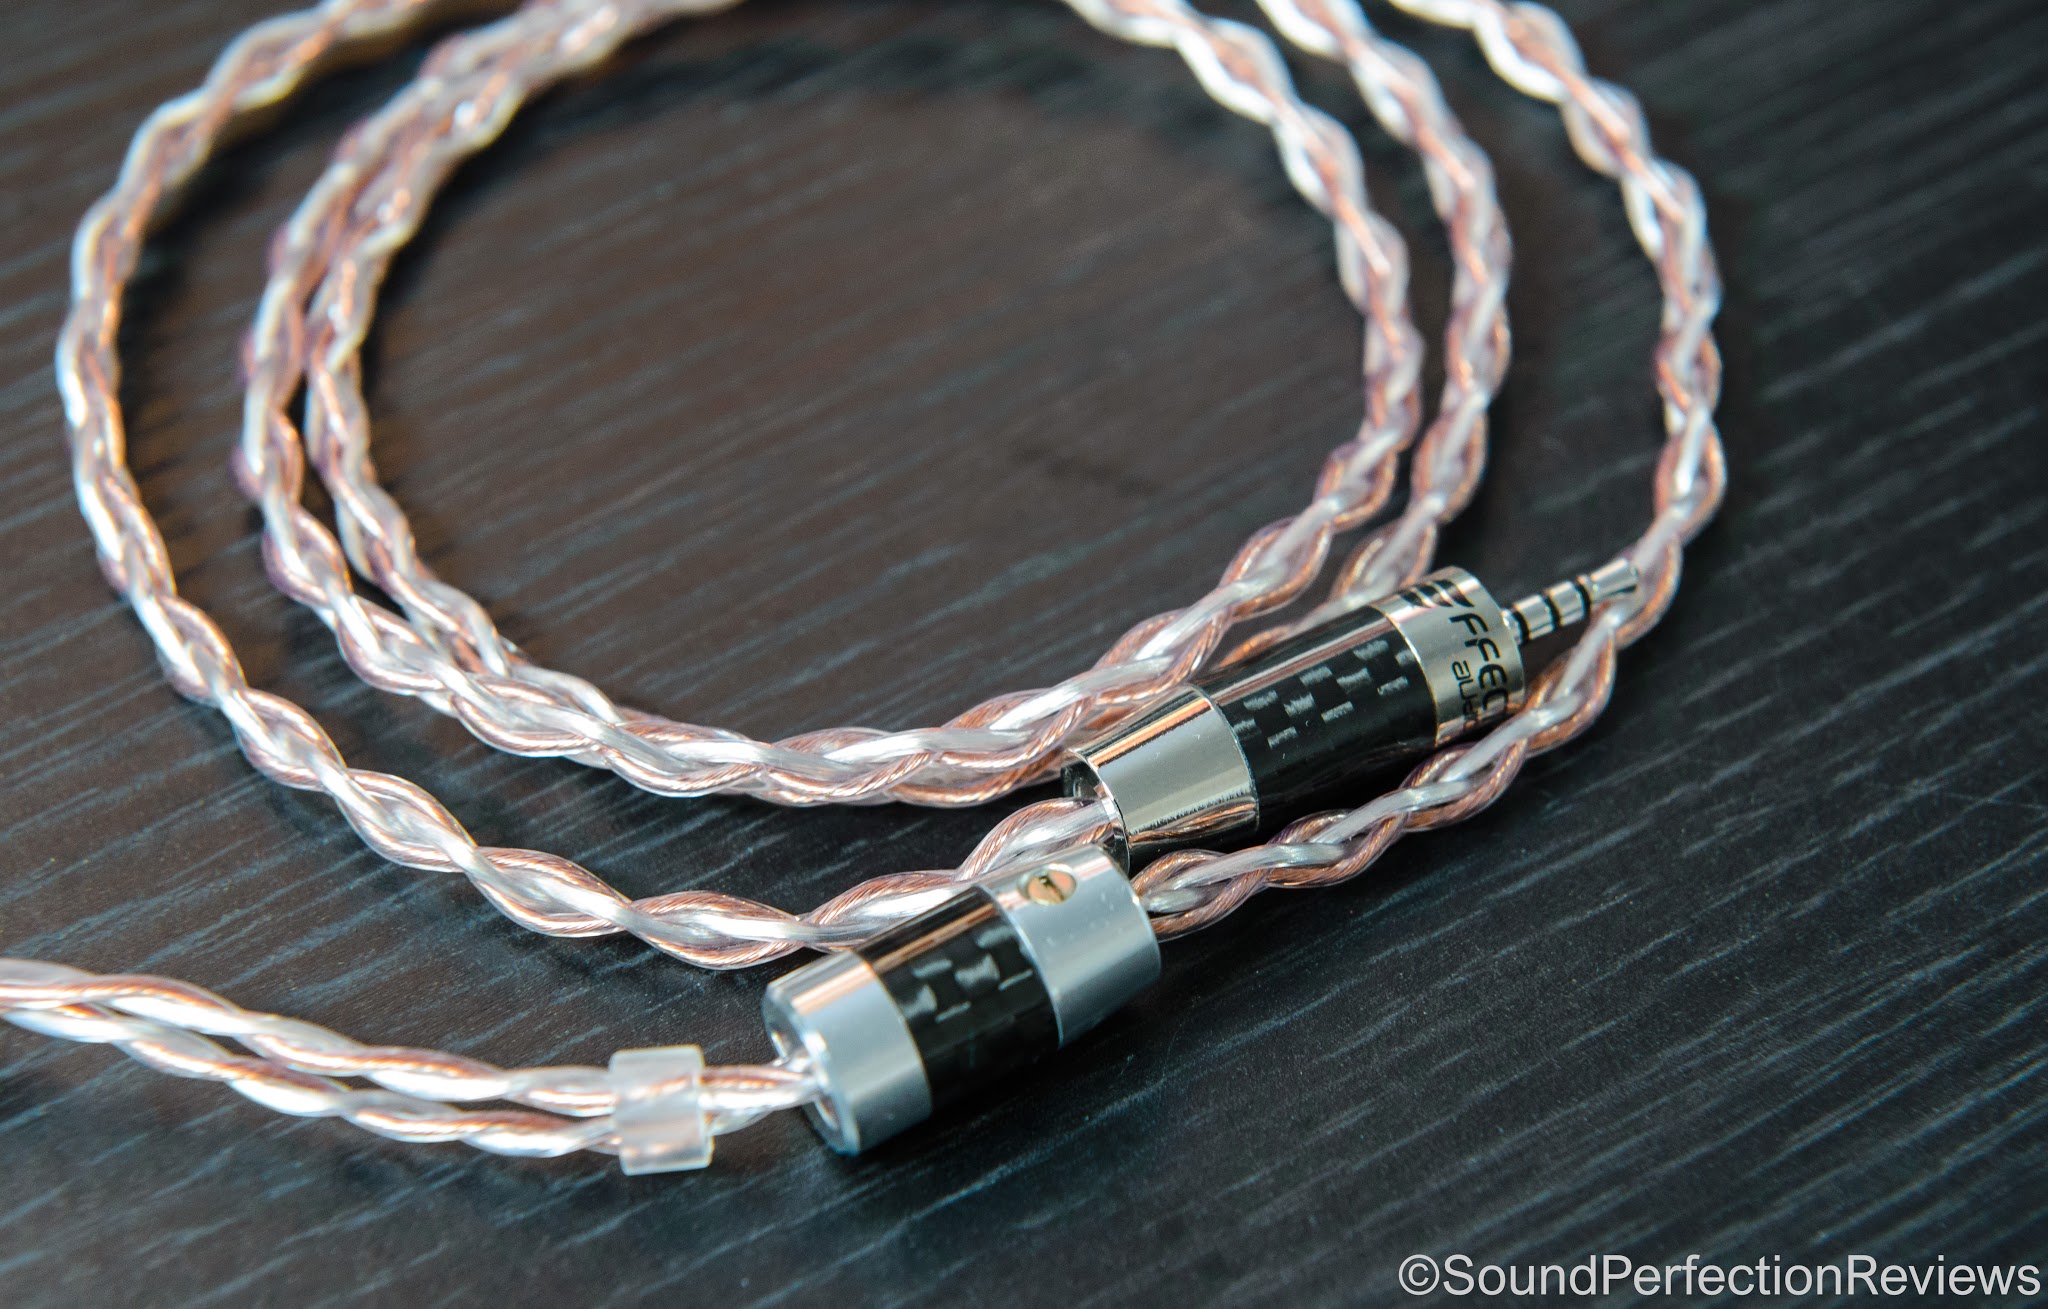 Review: Effect Audio Eros II IEM cable - Sound Perfection Reviews